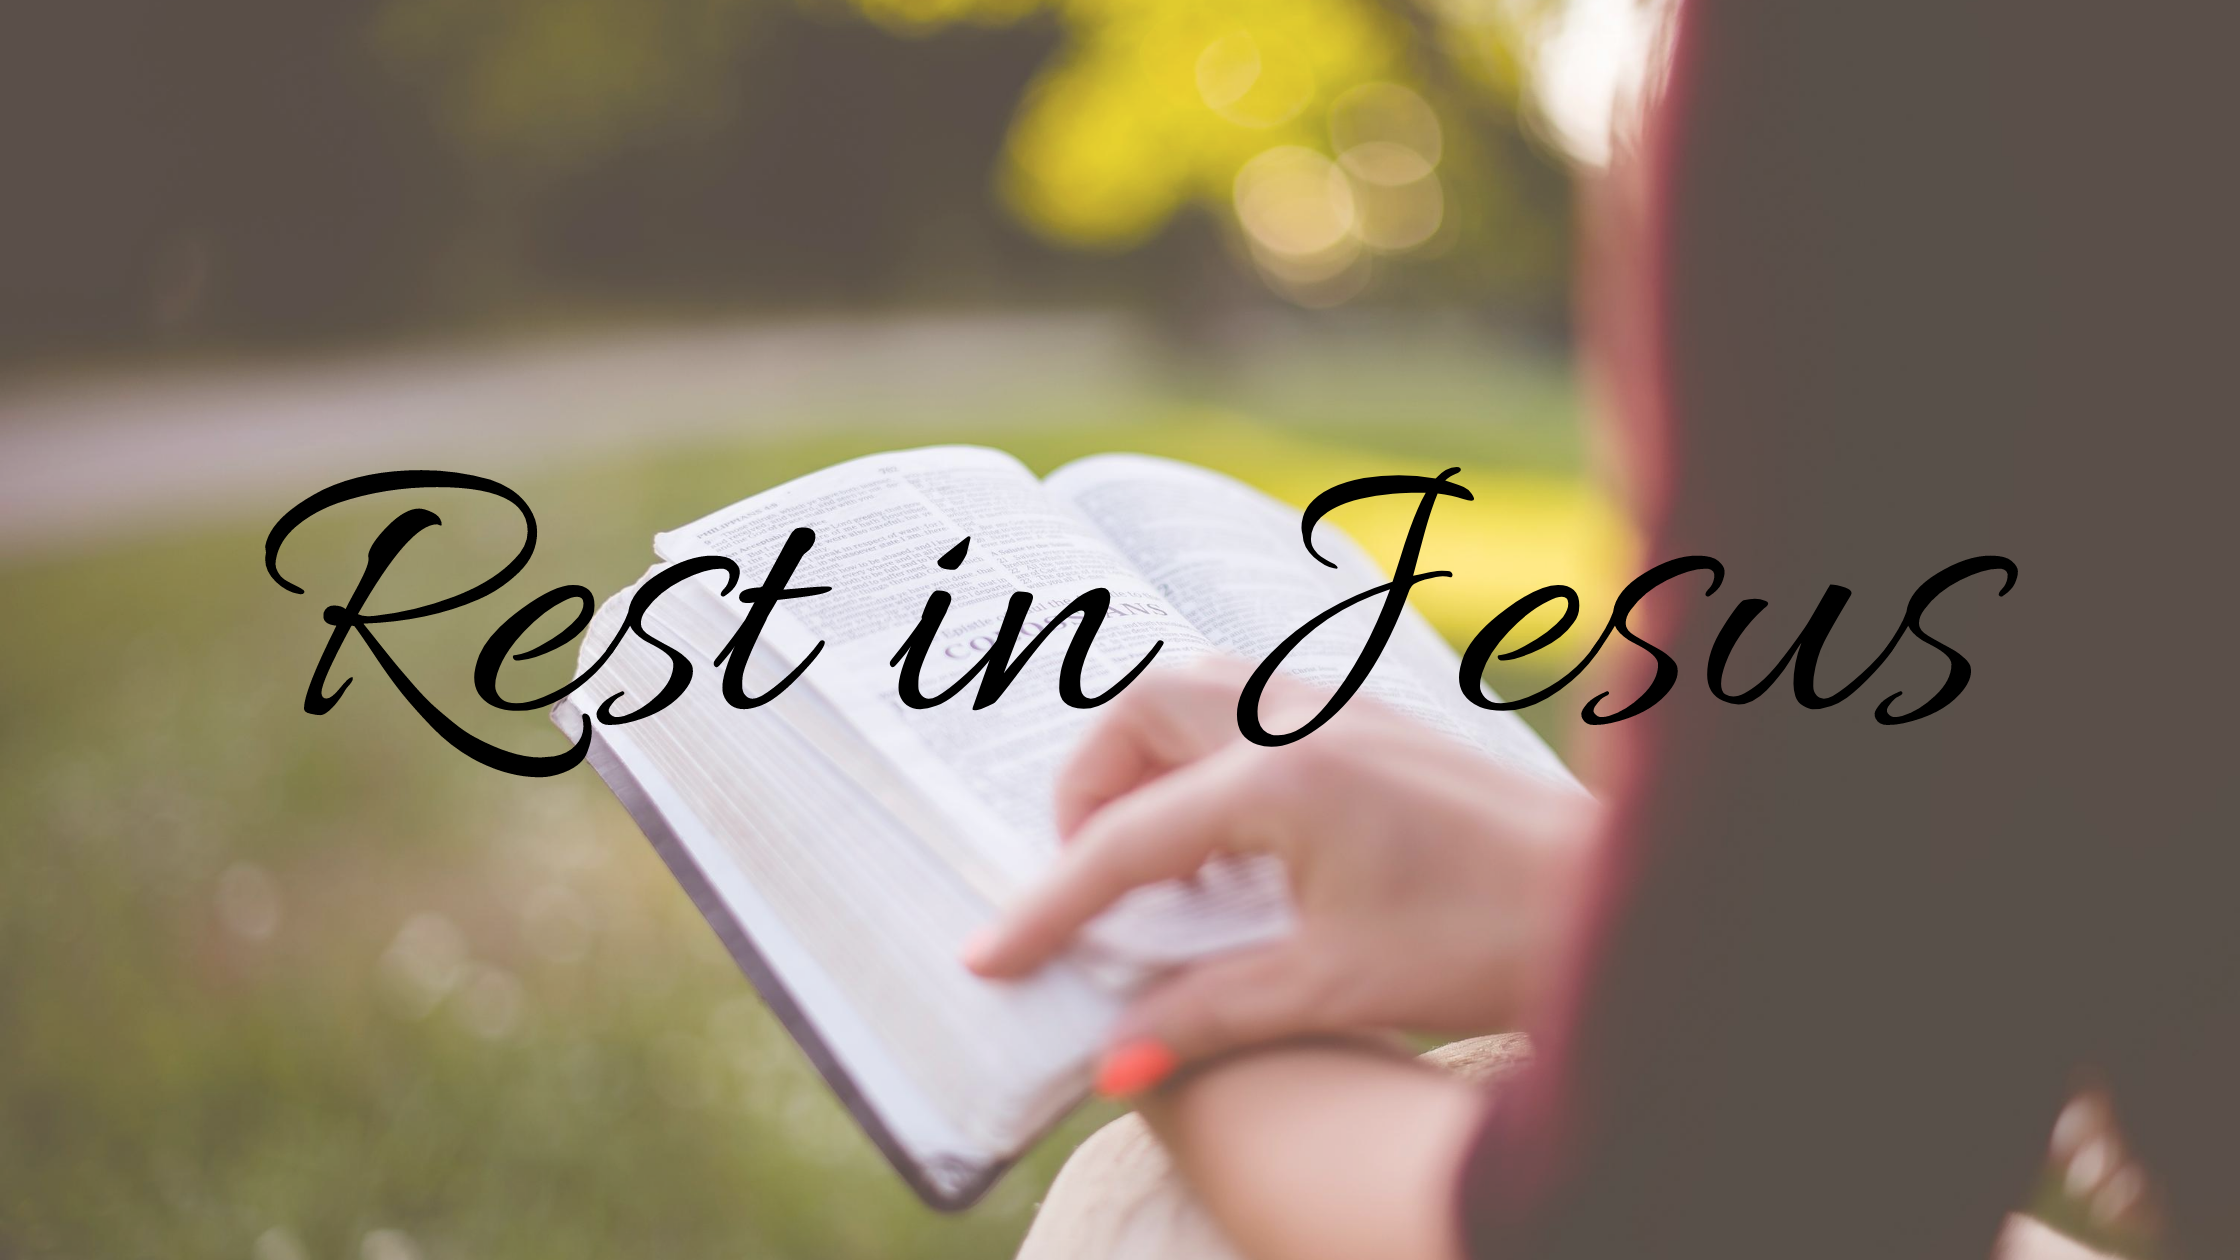 Rest in Jesus blog title with woman reading Bible